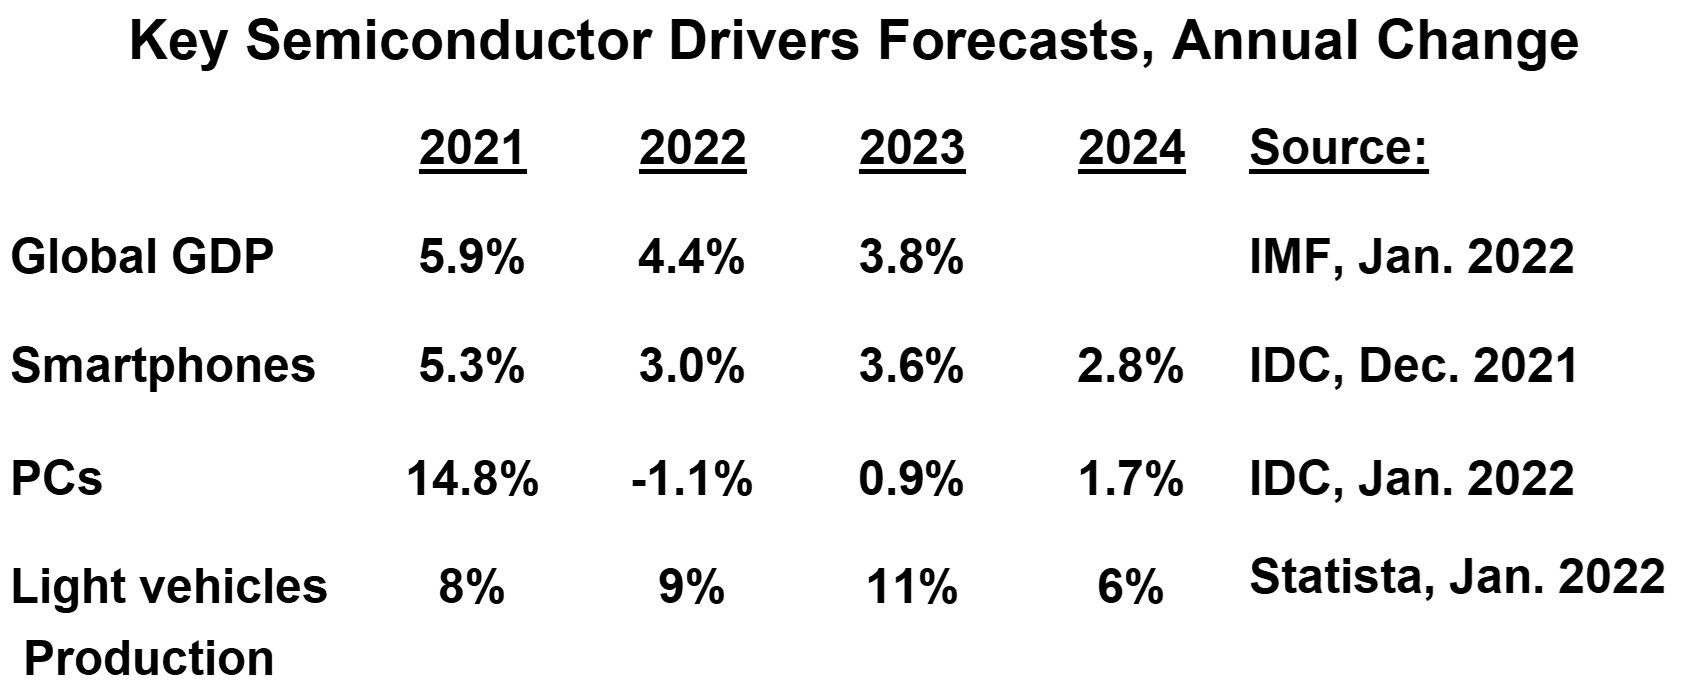 Key Semiconductor Drivers Forecast 2022